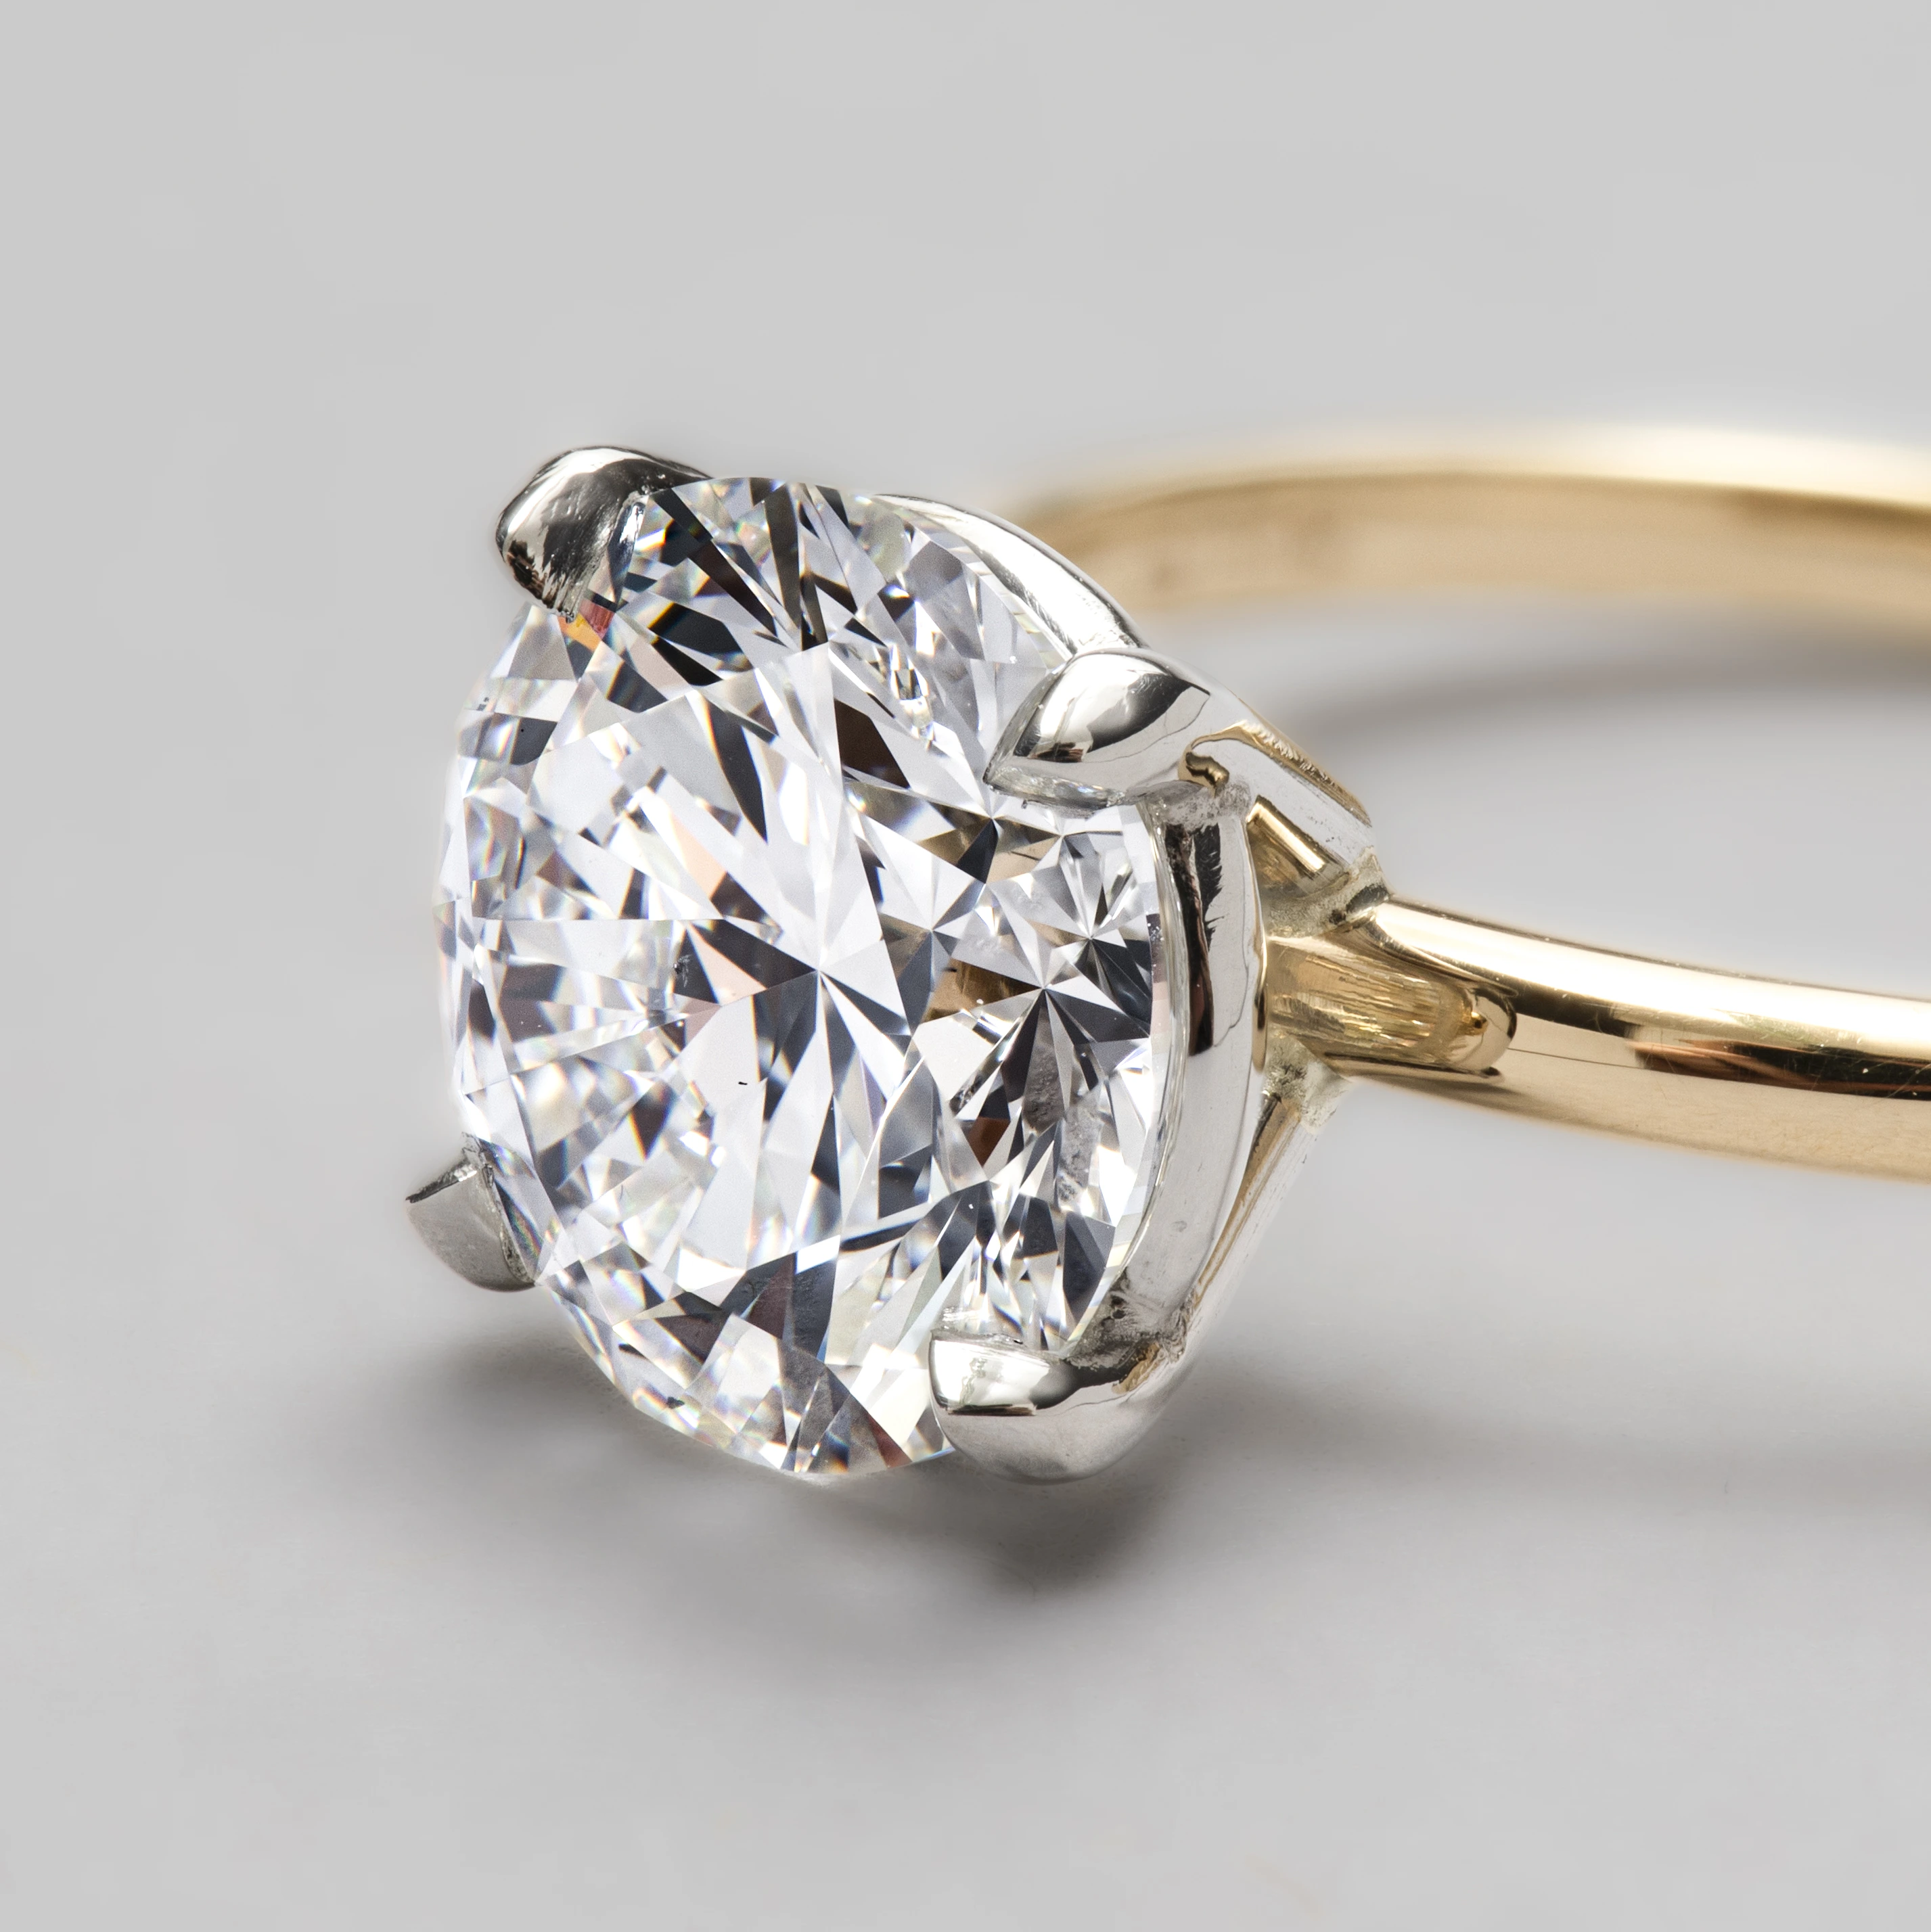 [PDR3068] 18ct Yellow Gold and Platinum Super Fine Engagement Ring with a 2.42ct E Colour, VS2 Round Brilliant Diamond (GIA 5211134898)